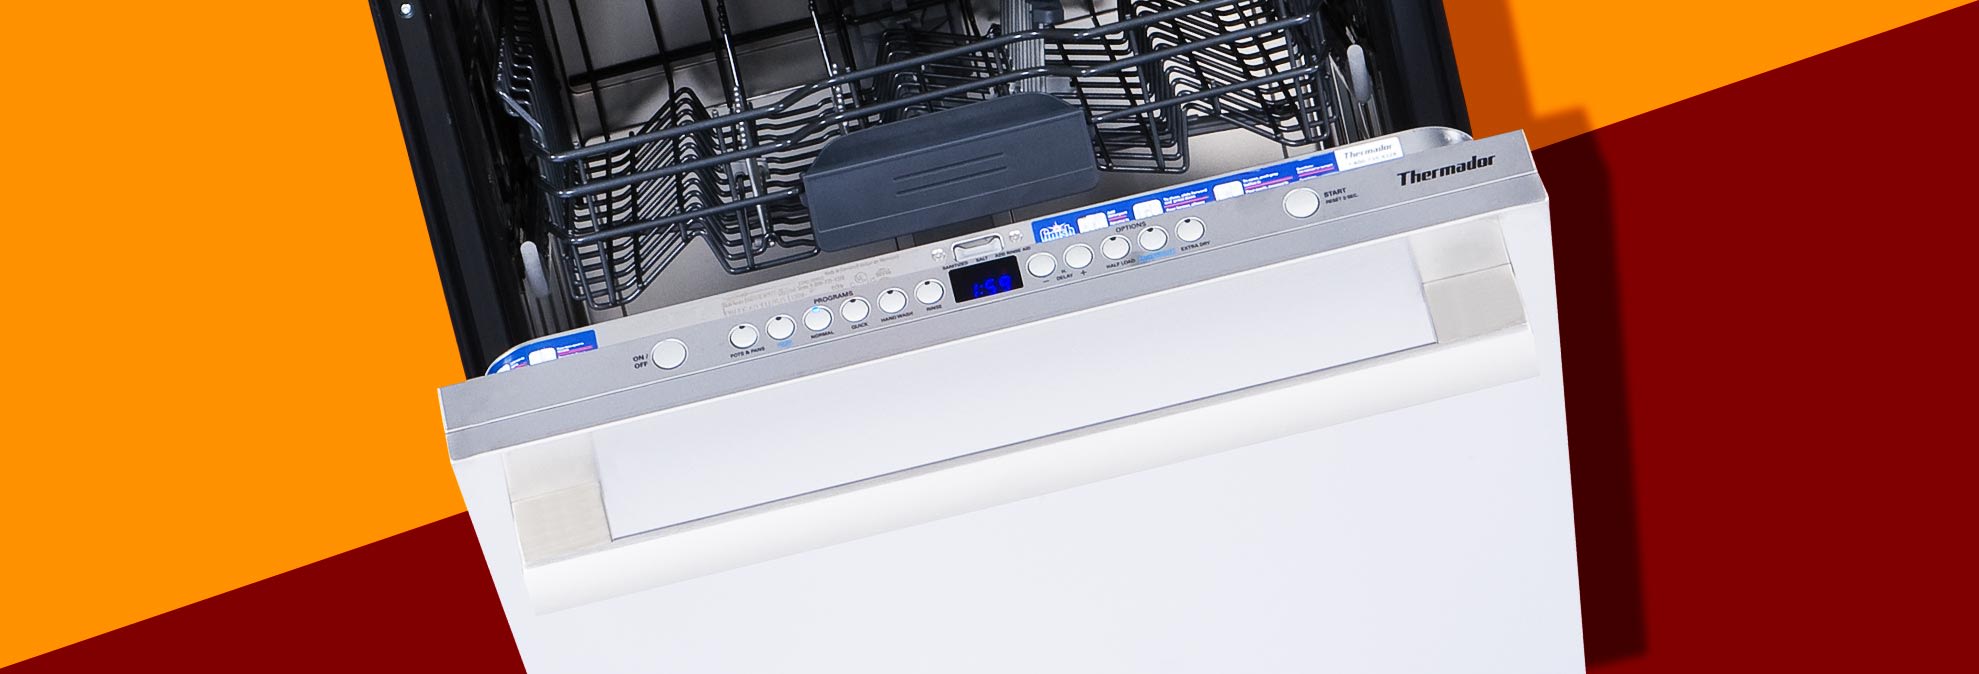 Maker of Bosch Expands Dishwasher Recall to 663,000 Models Consumer